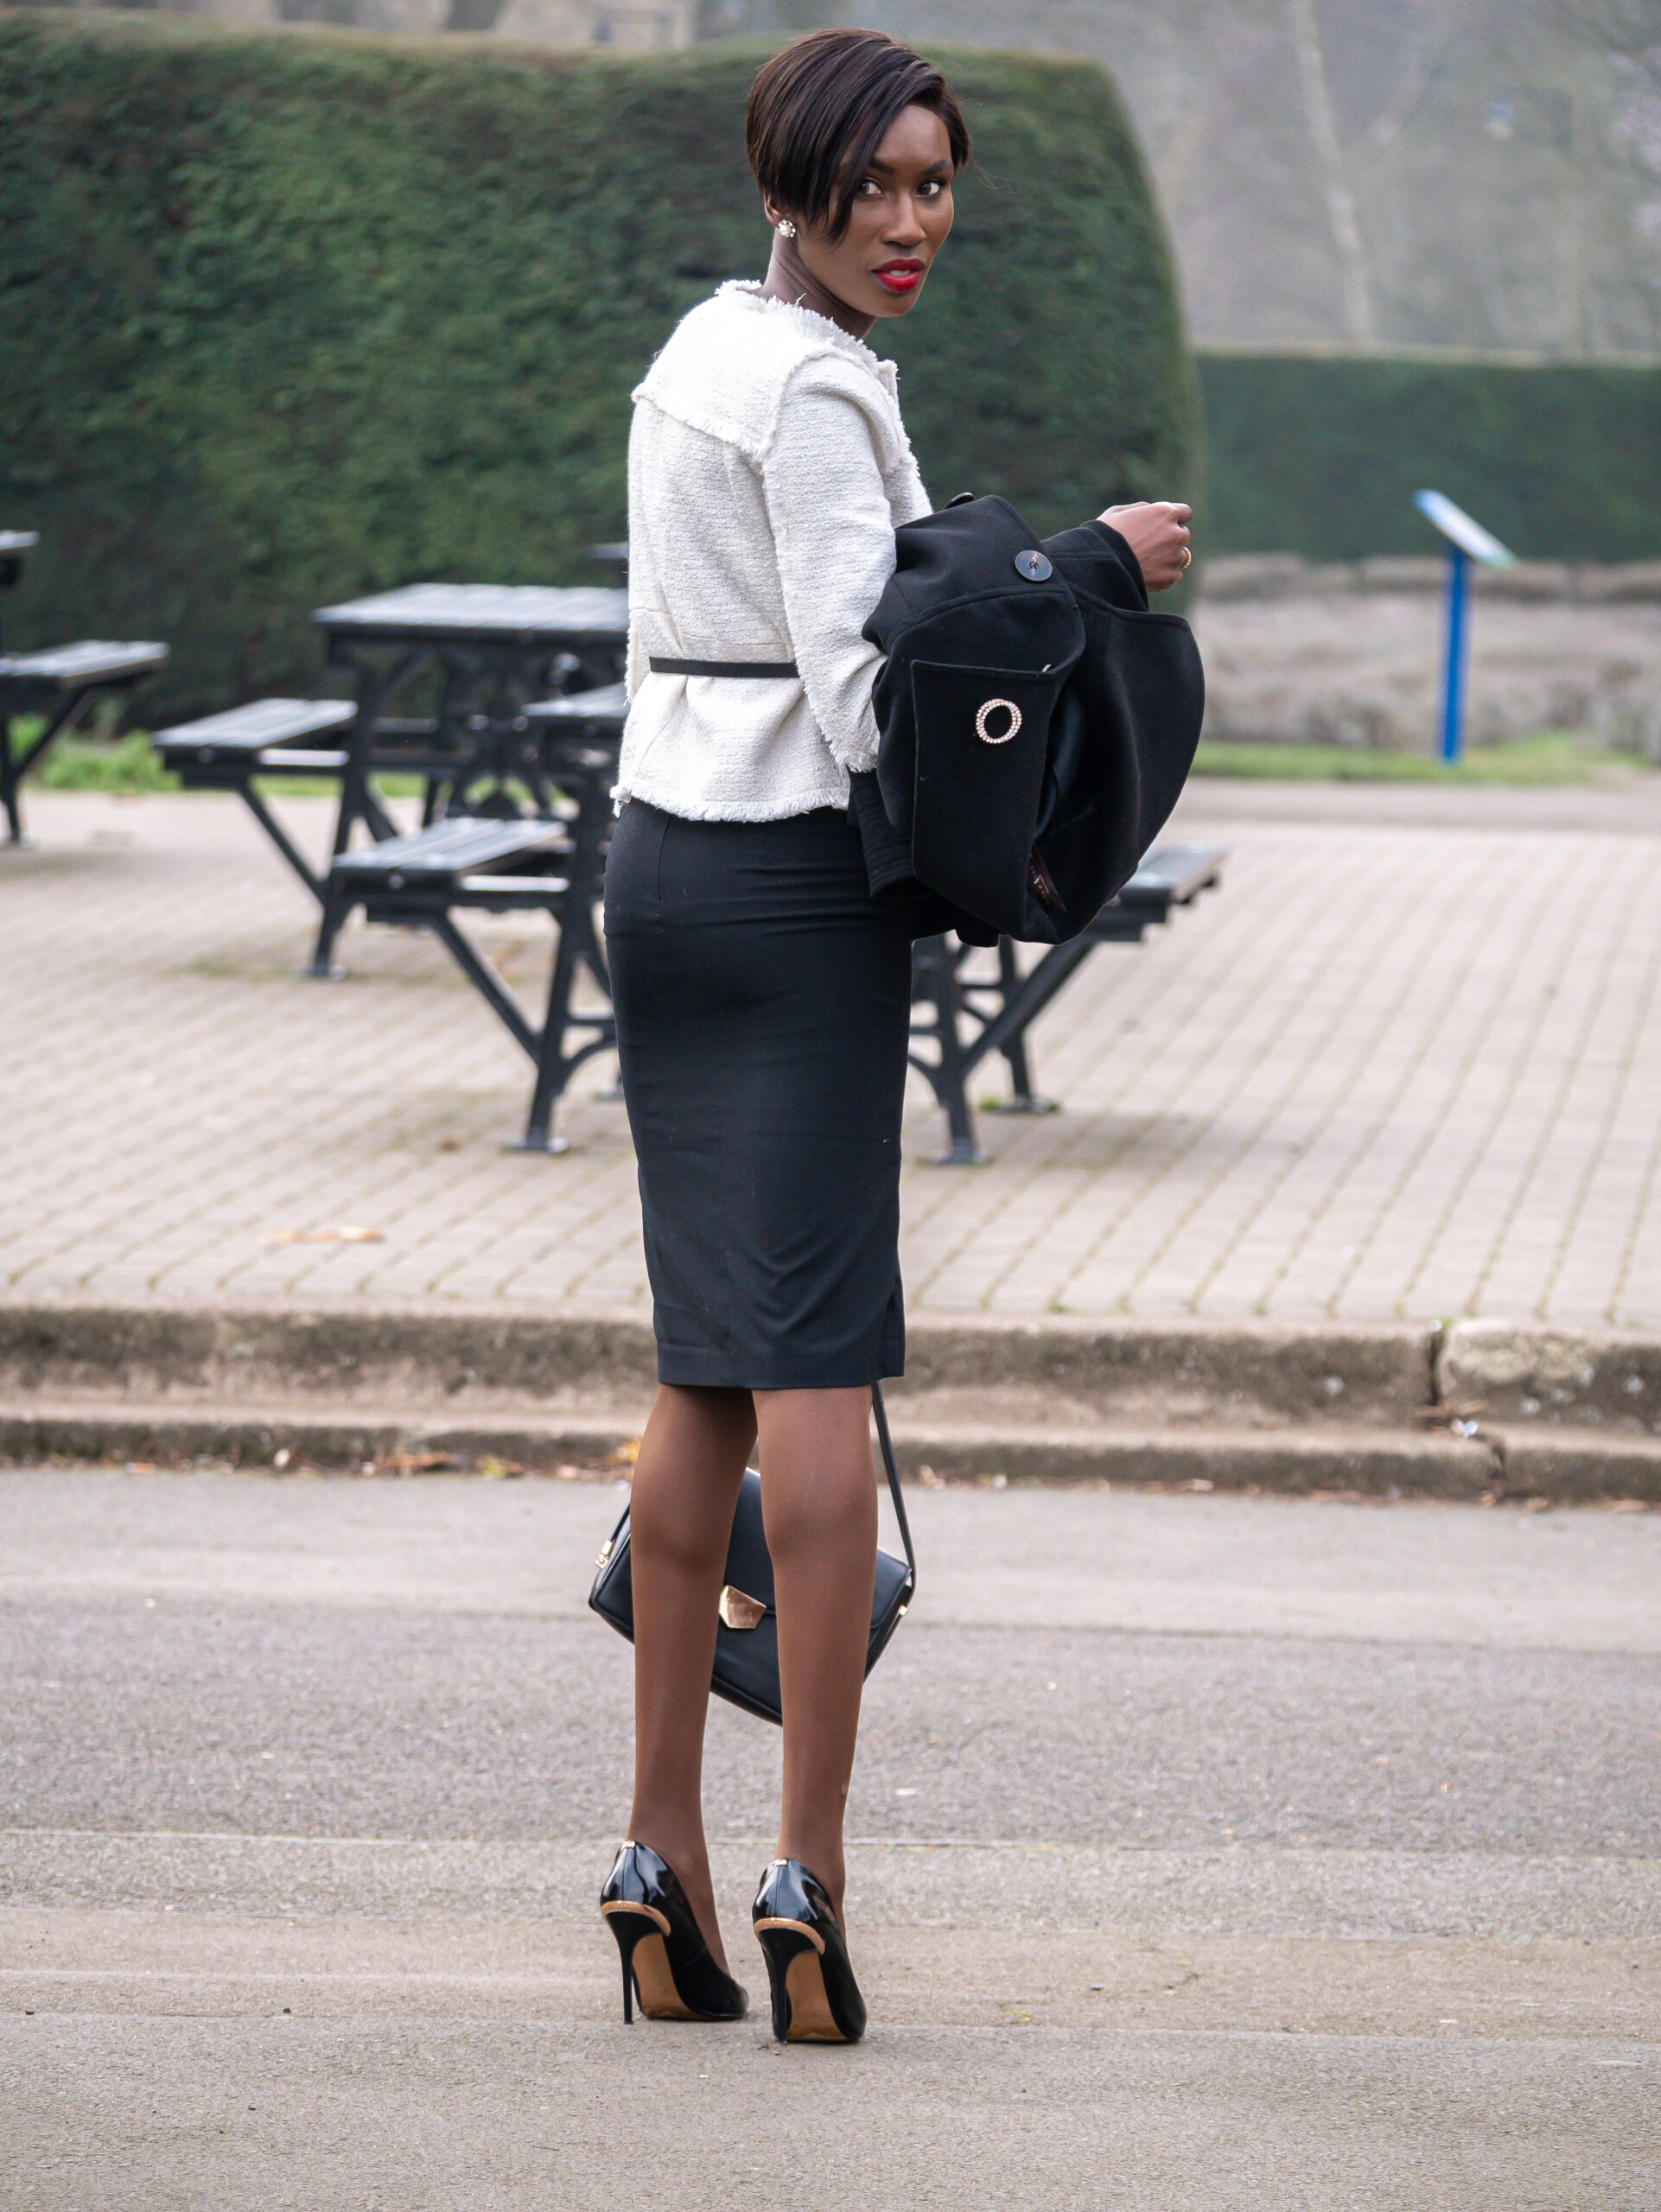 Boucle White Blazer and Black skirt - A timeless style